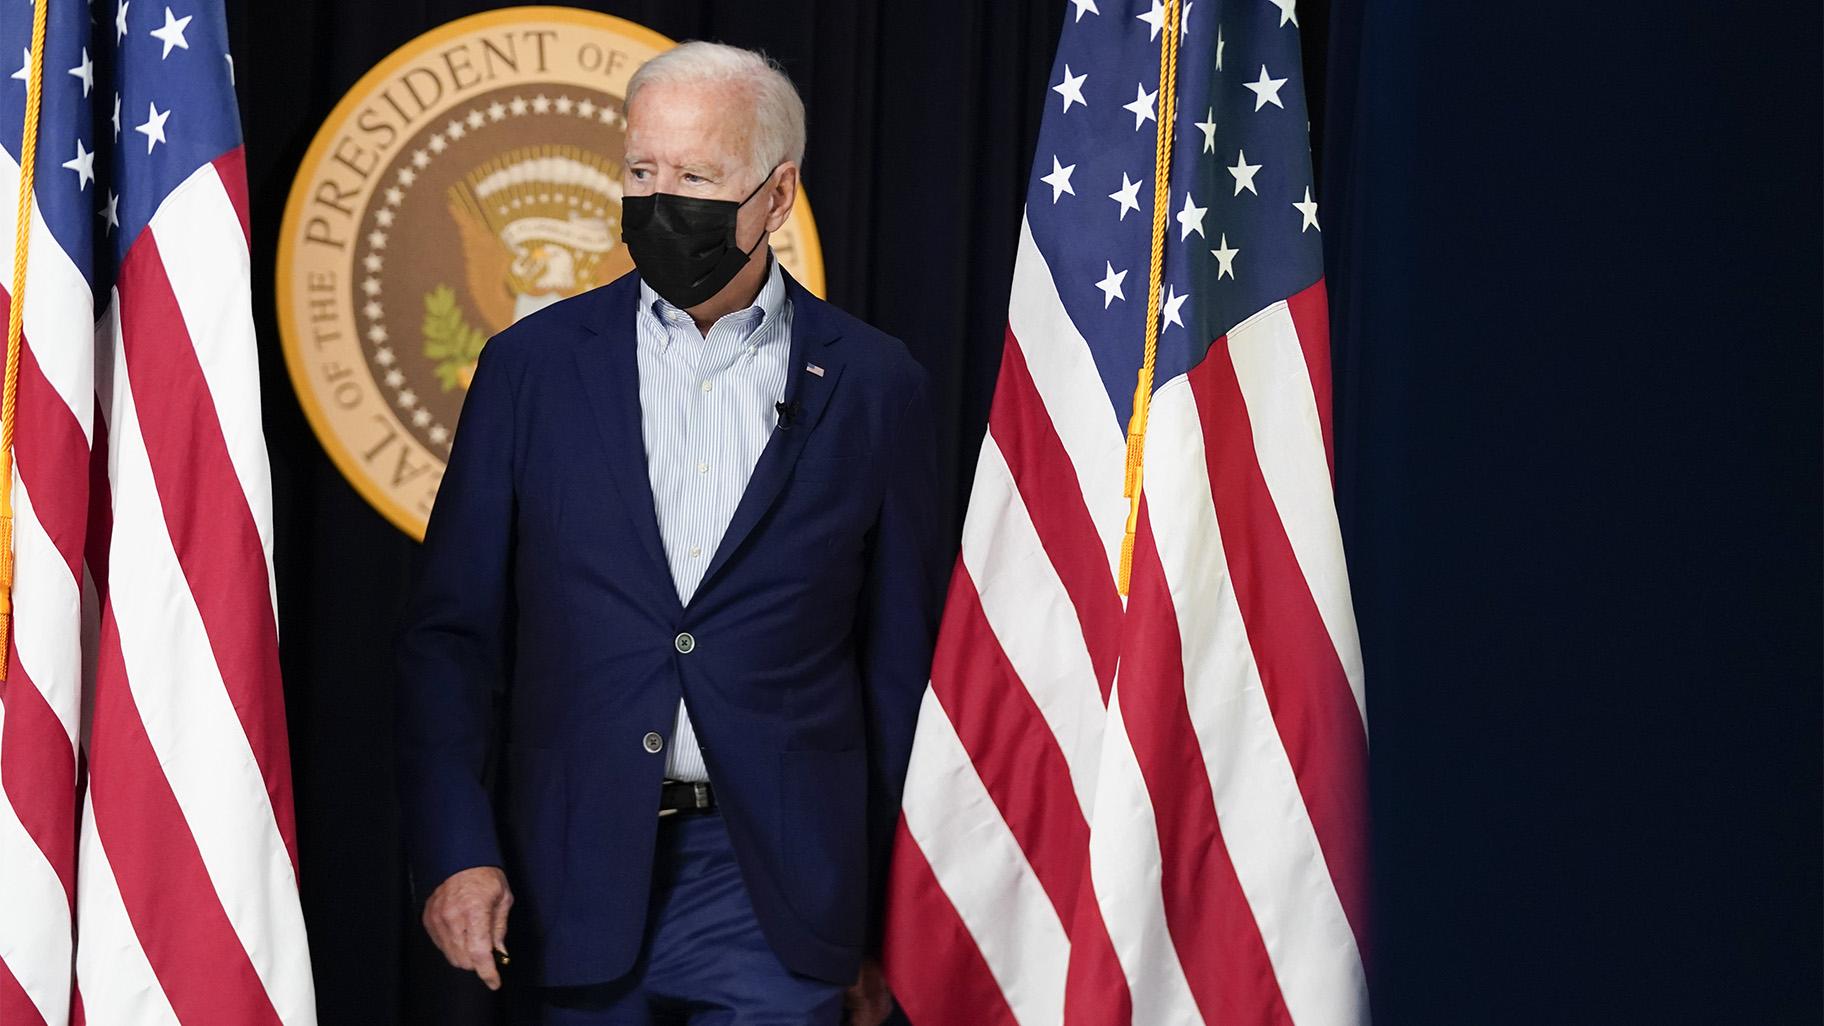 President Joe Biden arrives to attend a FEMA briefing on Hurricane Ida in the South Court Auditorium in the Eisenhower Executive Office Building on the White House Campus, Saturday, Aug. 28, 2021, in Washington. (AP Photo / Manuel Balce Ceneta)